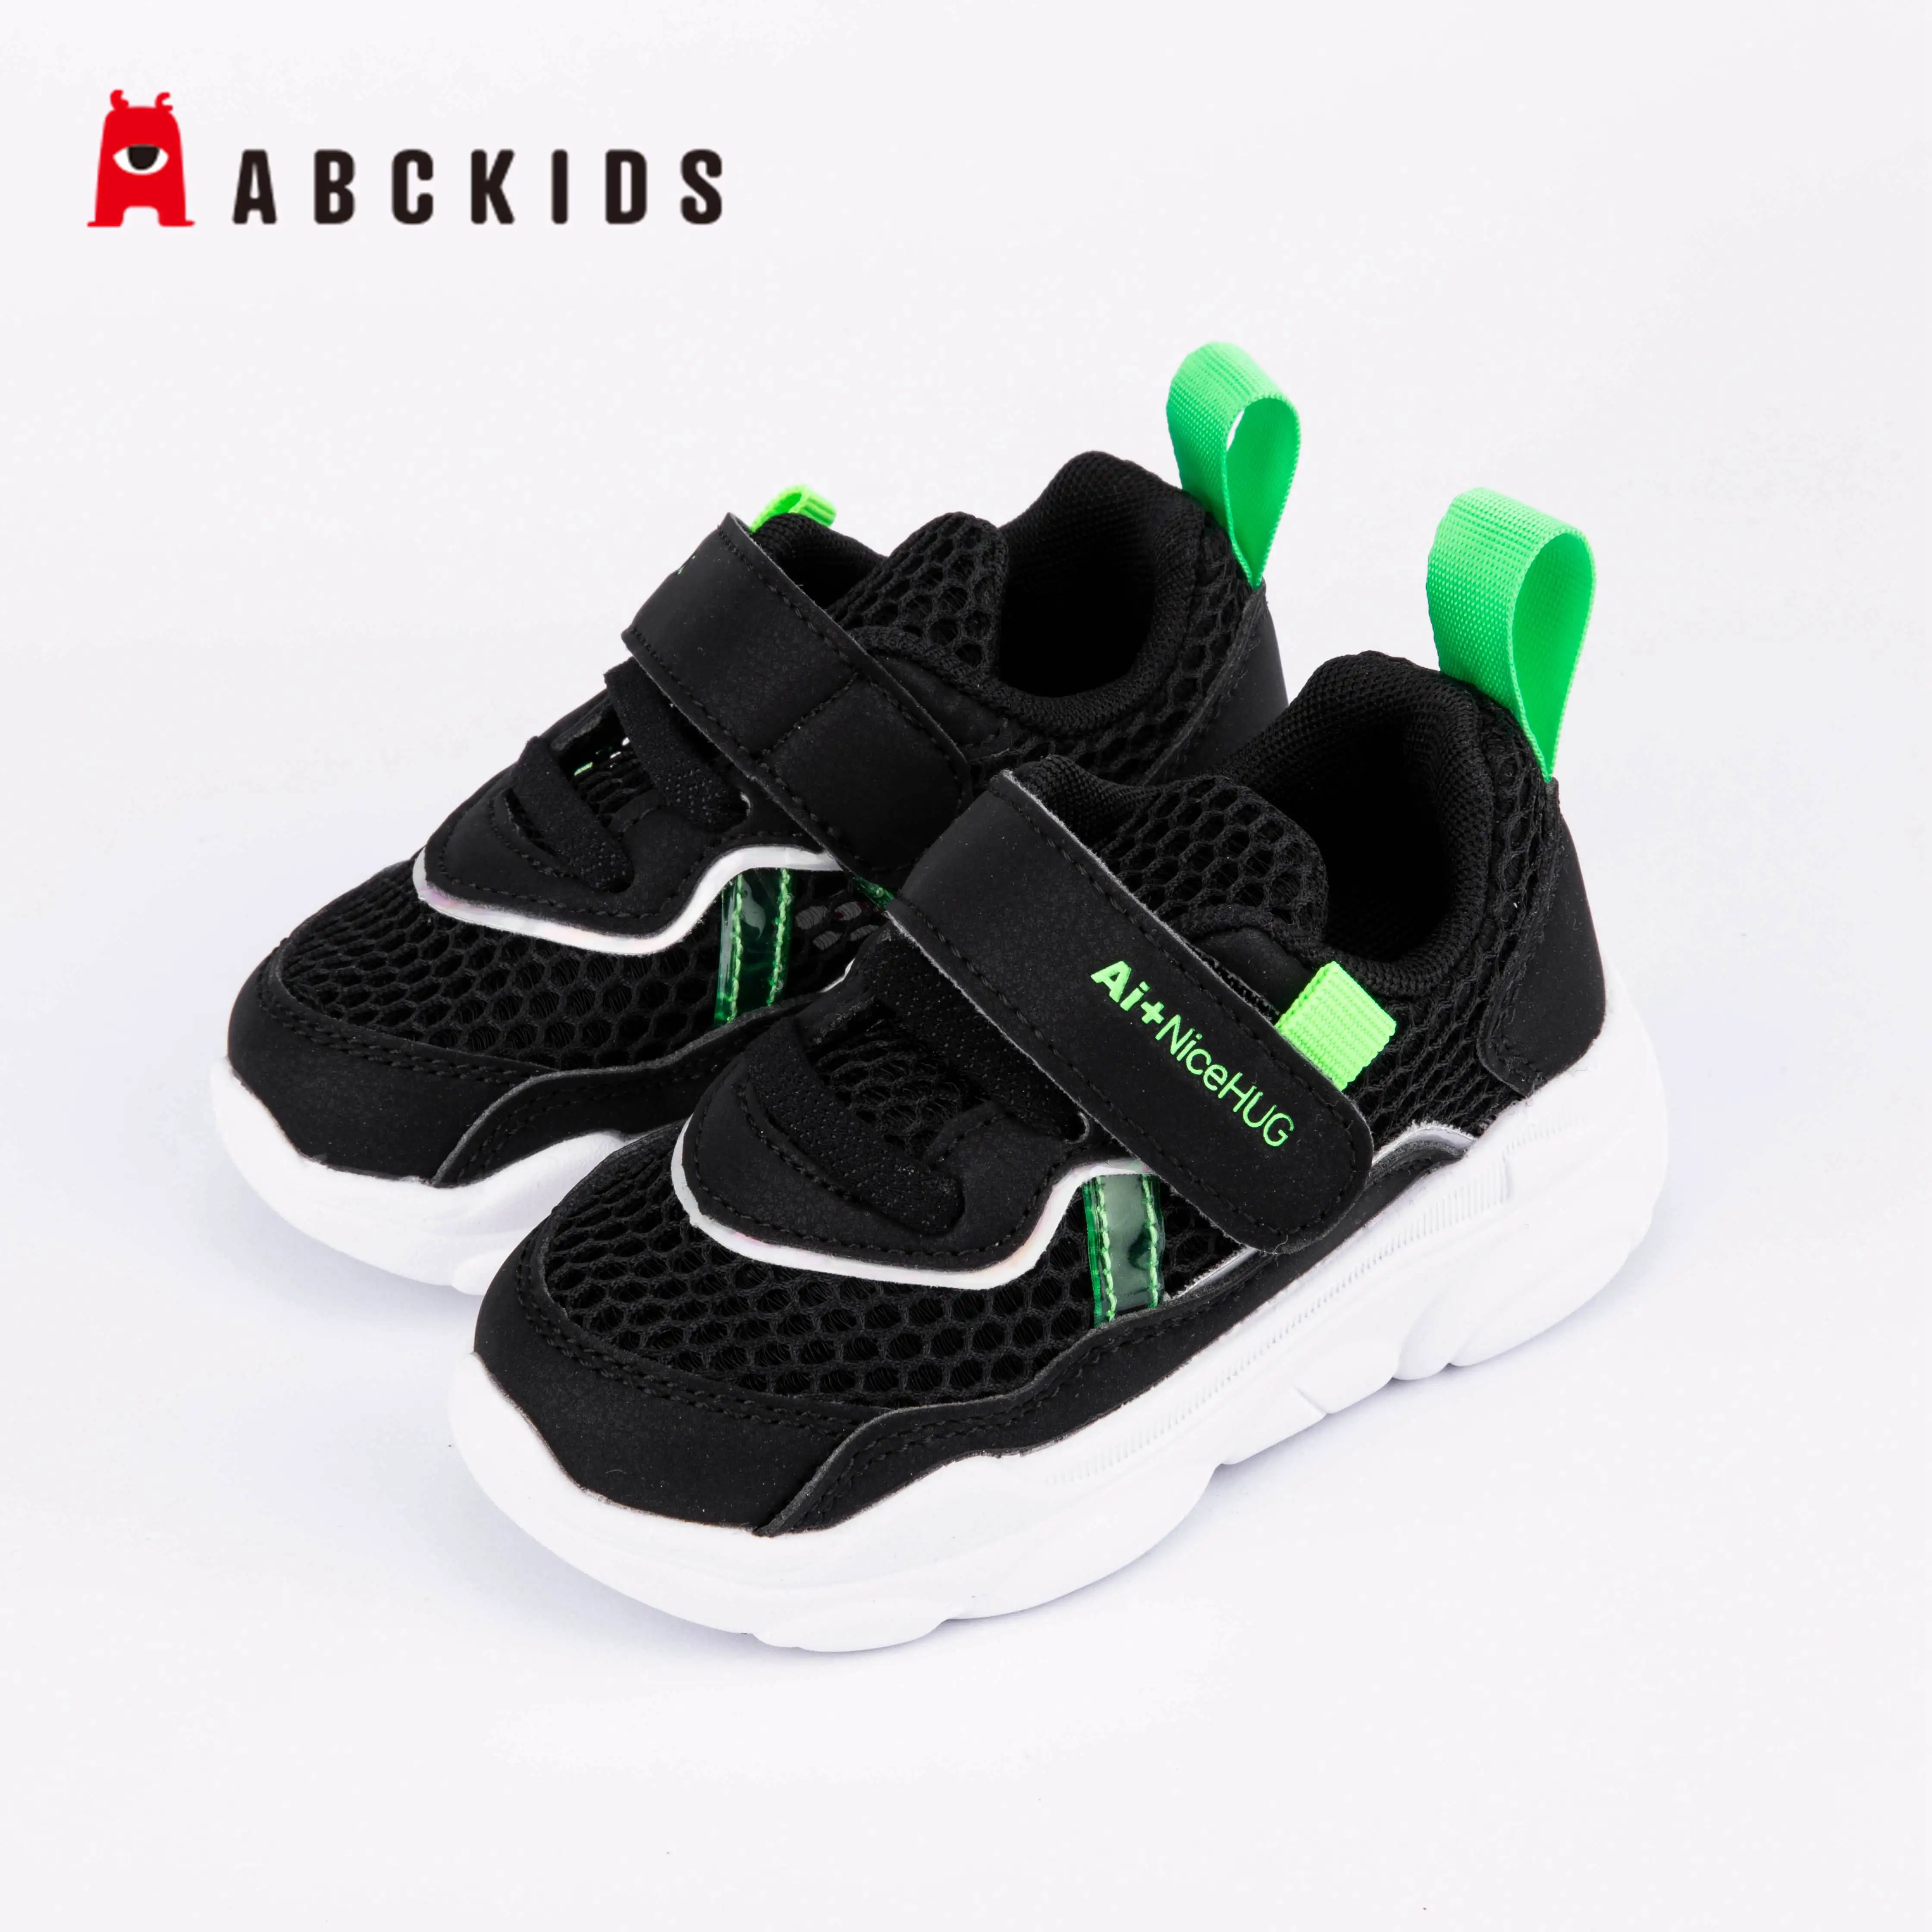 ABC KIDS Top Quality Sports Shoes For Kids New Desine Colorful Kid Sport Shoes